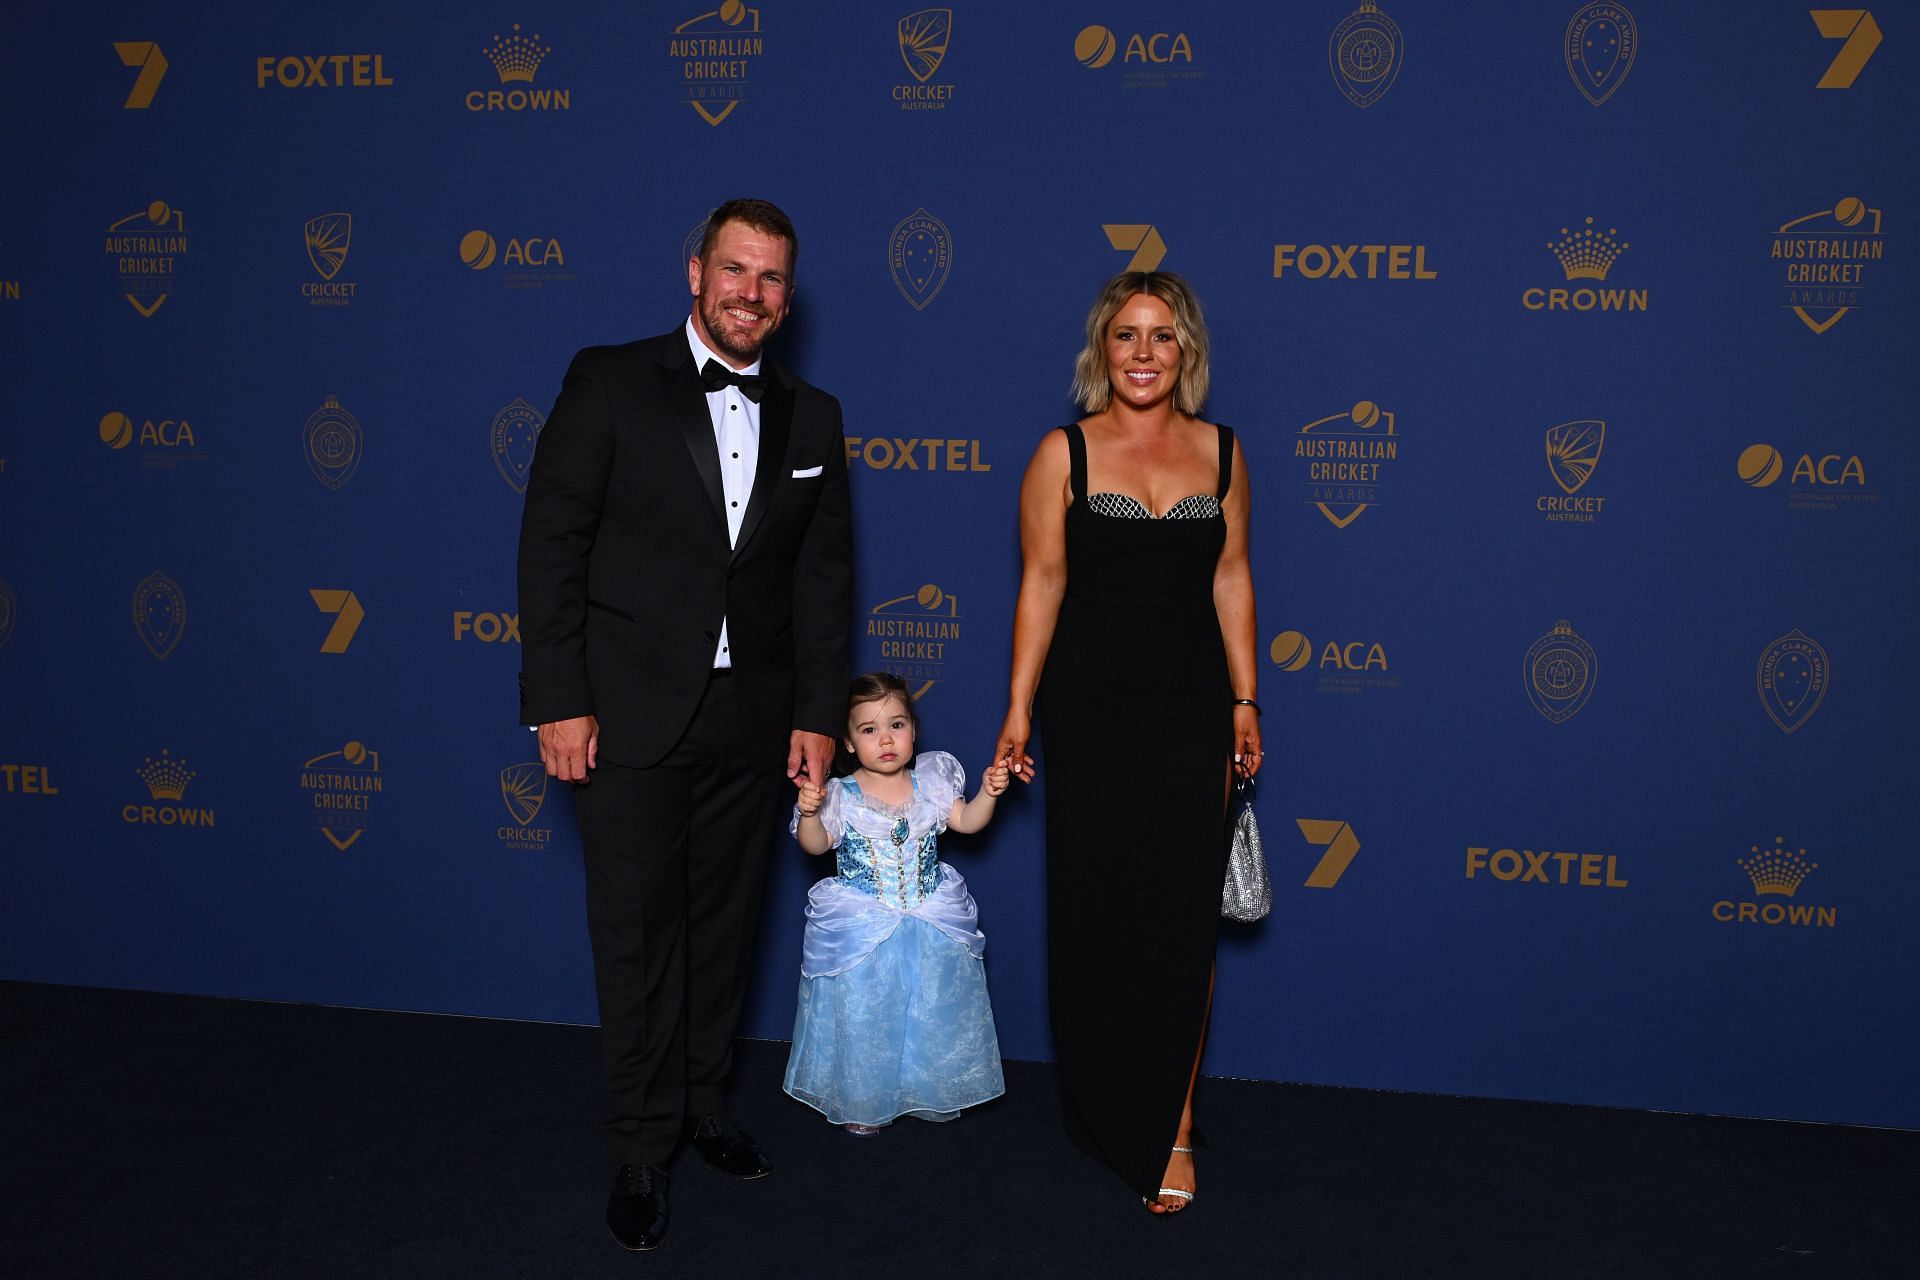 Aaron Finch has retired from international cricket (Image: Getty)